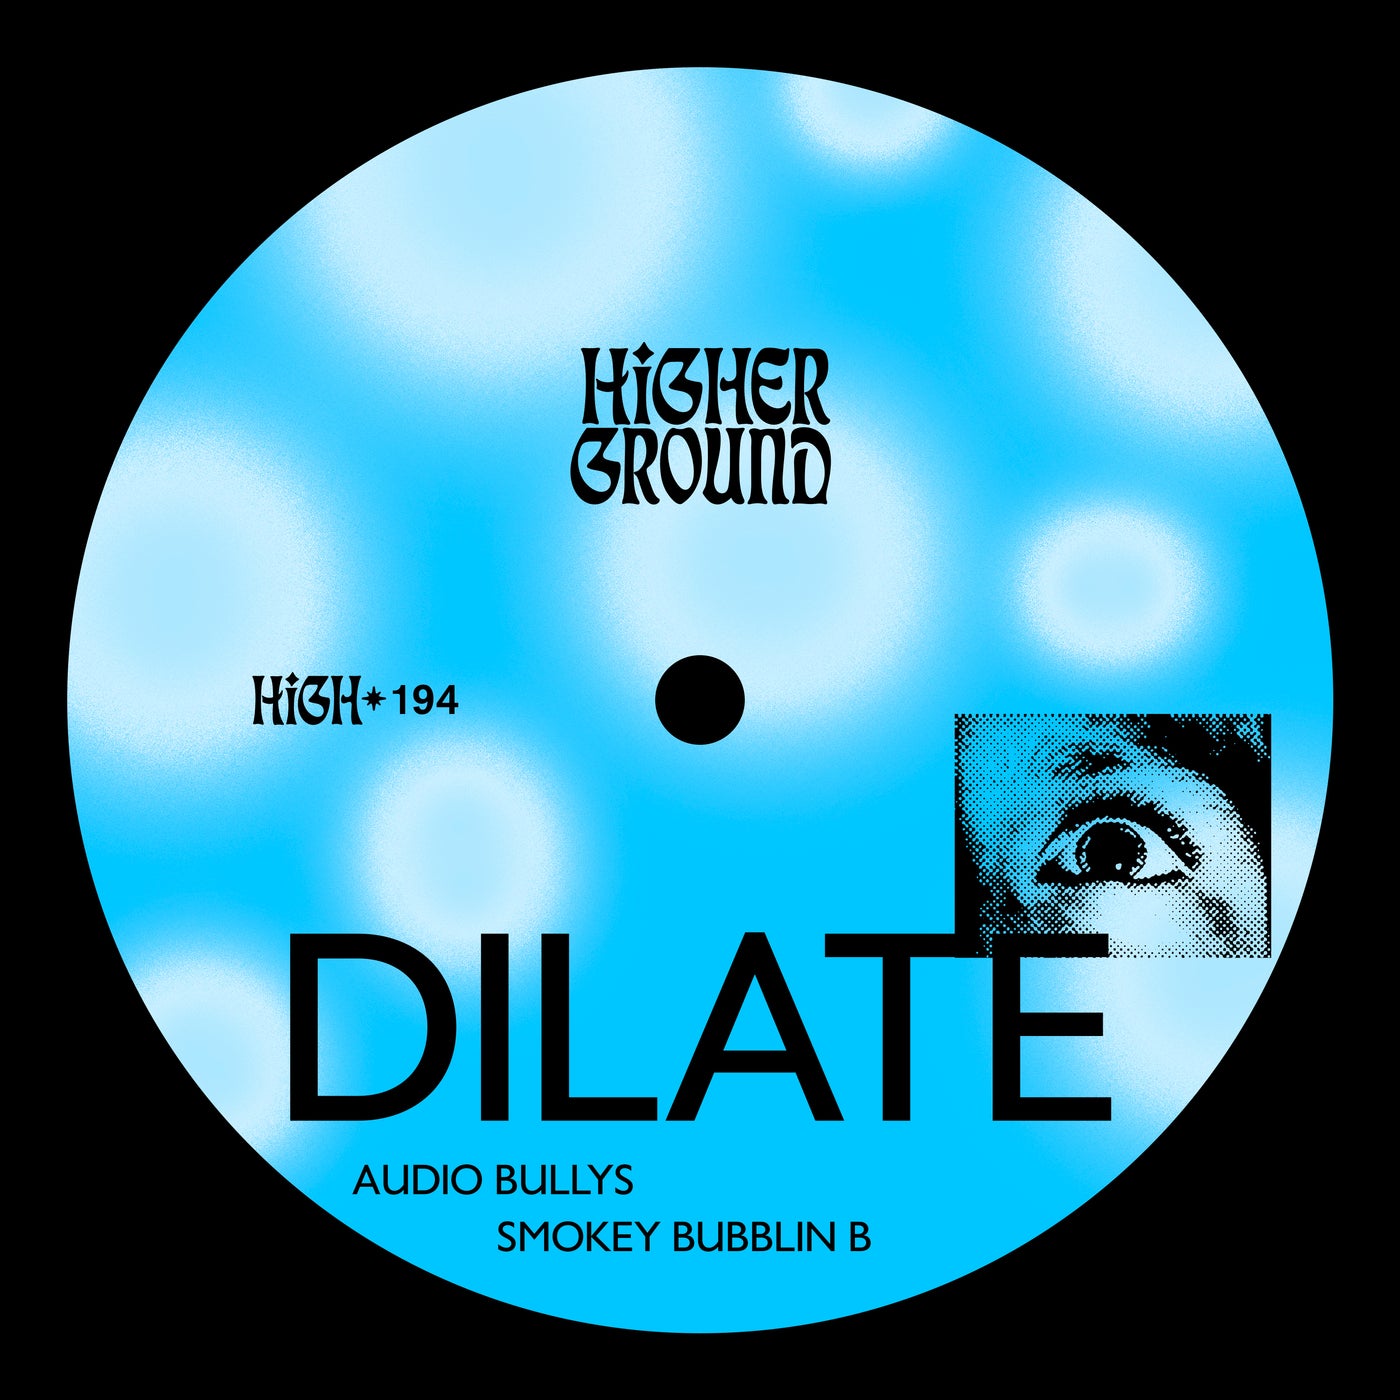 Dilate (Extended)